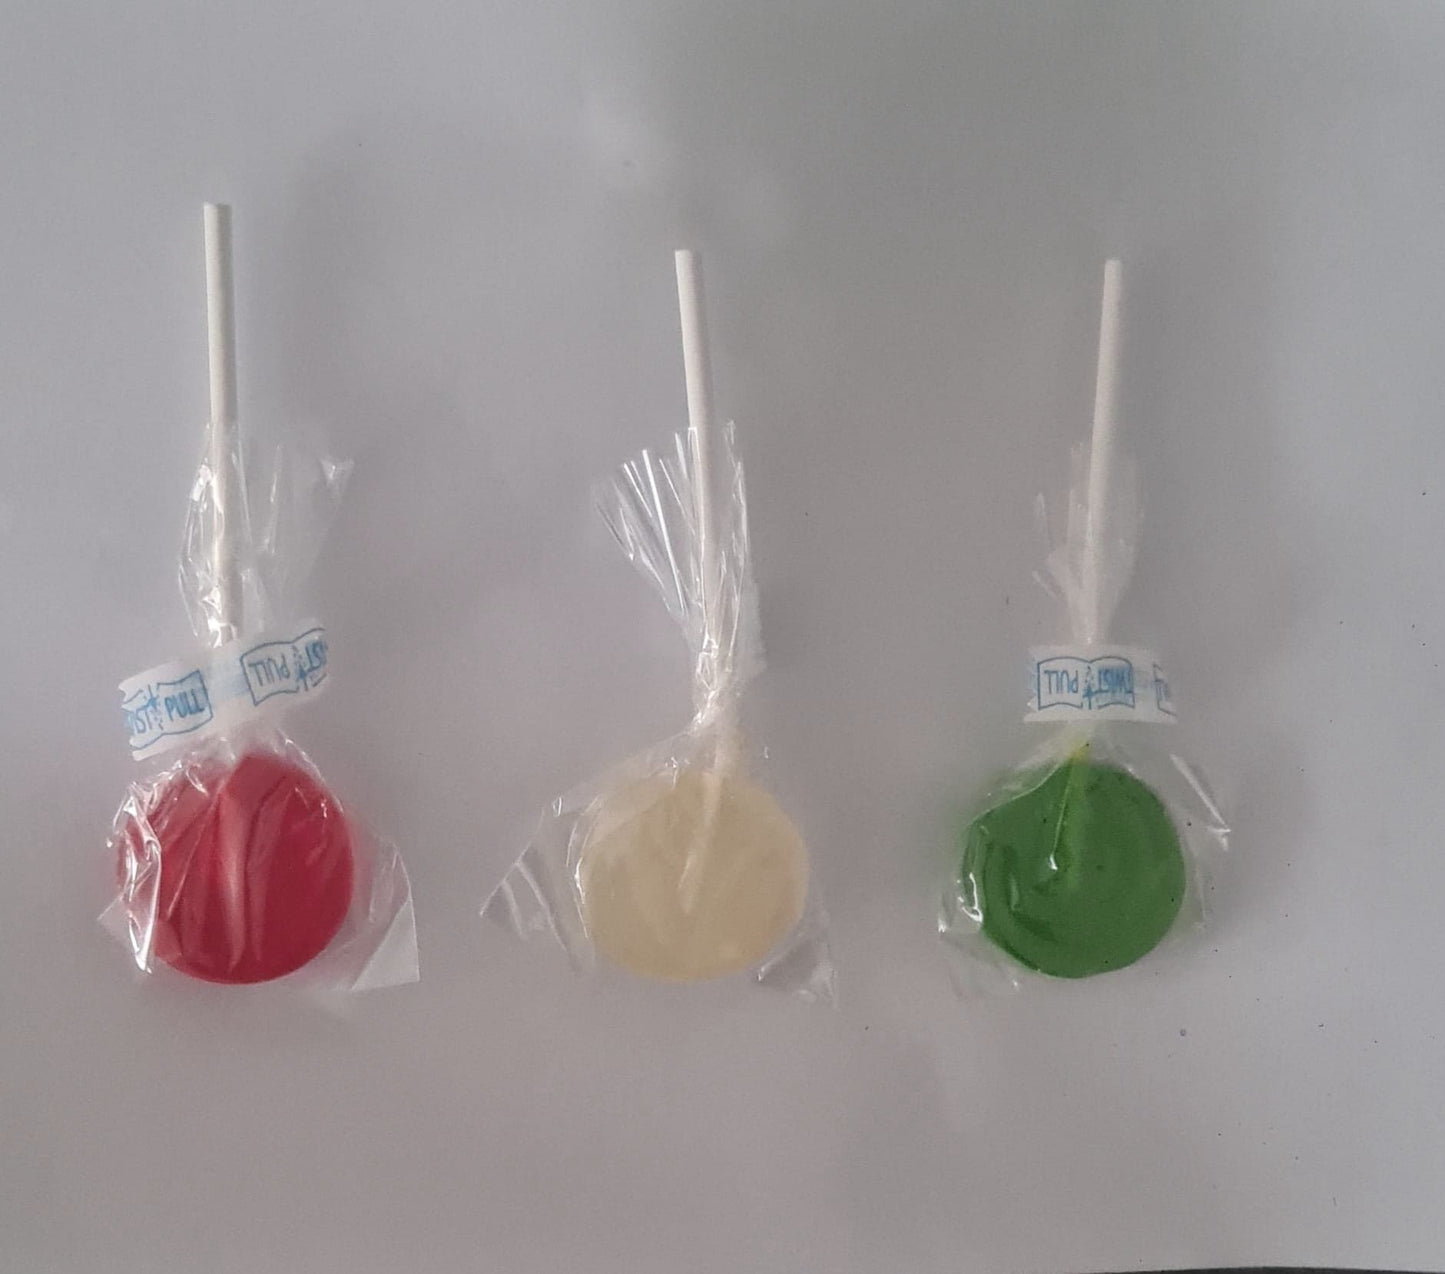 HHC 3 lolly's  70mg hhc per lolly slechts € 17,95